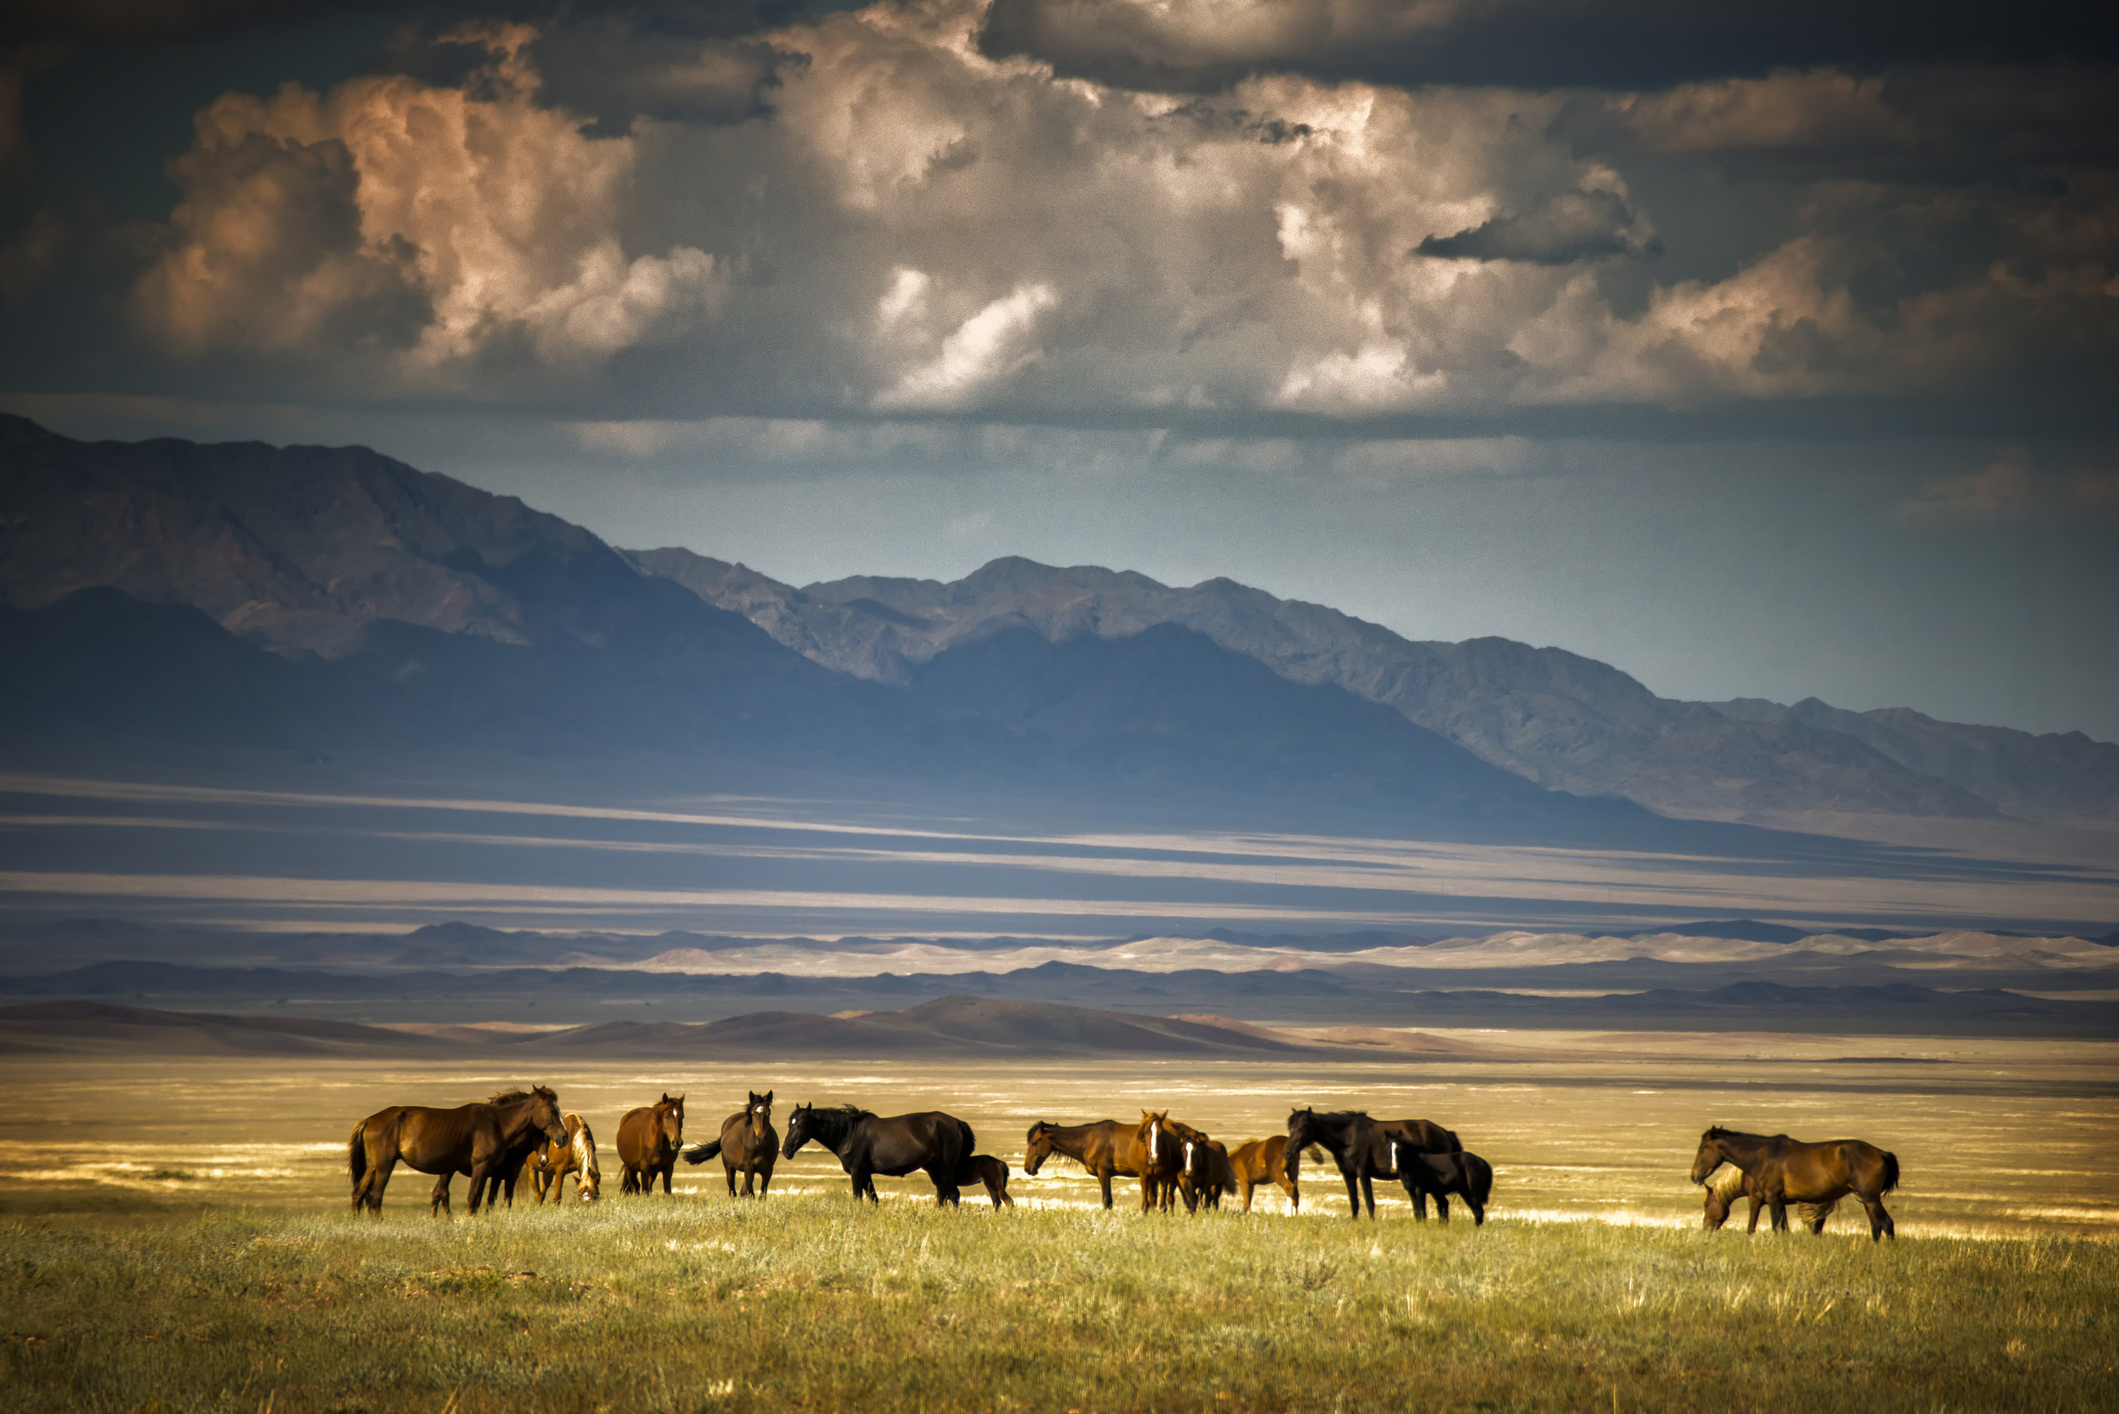 Herd of horses grazing with mountains in the background under a cloudy sky